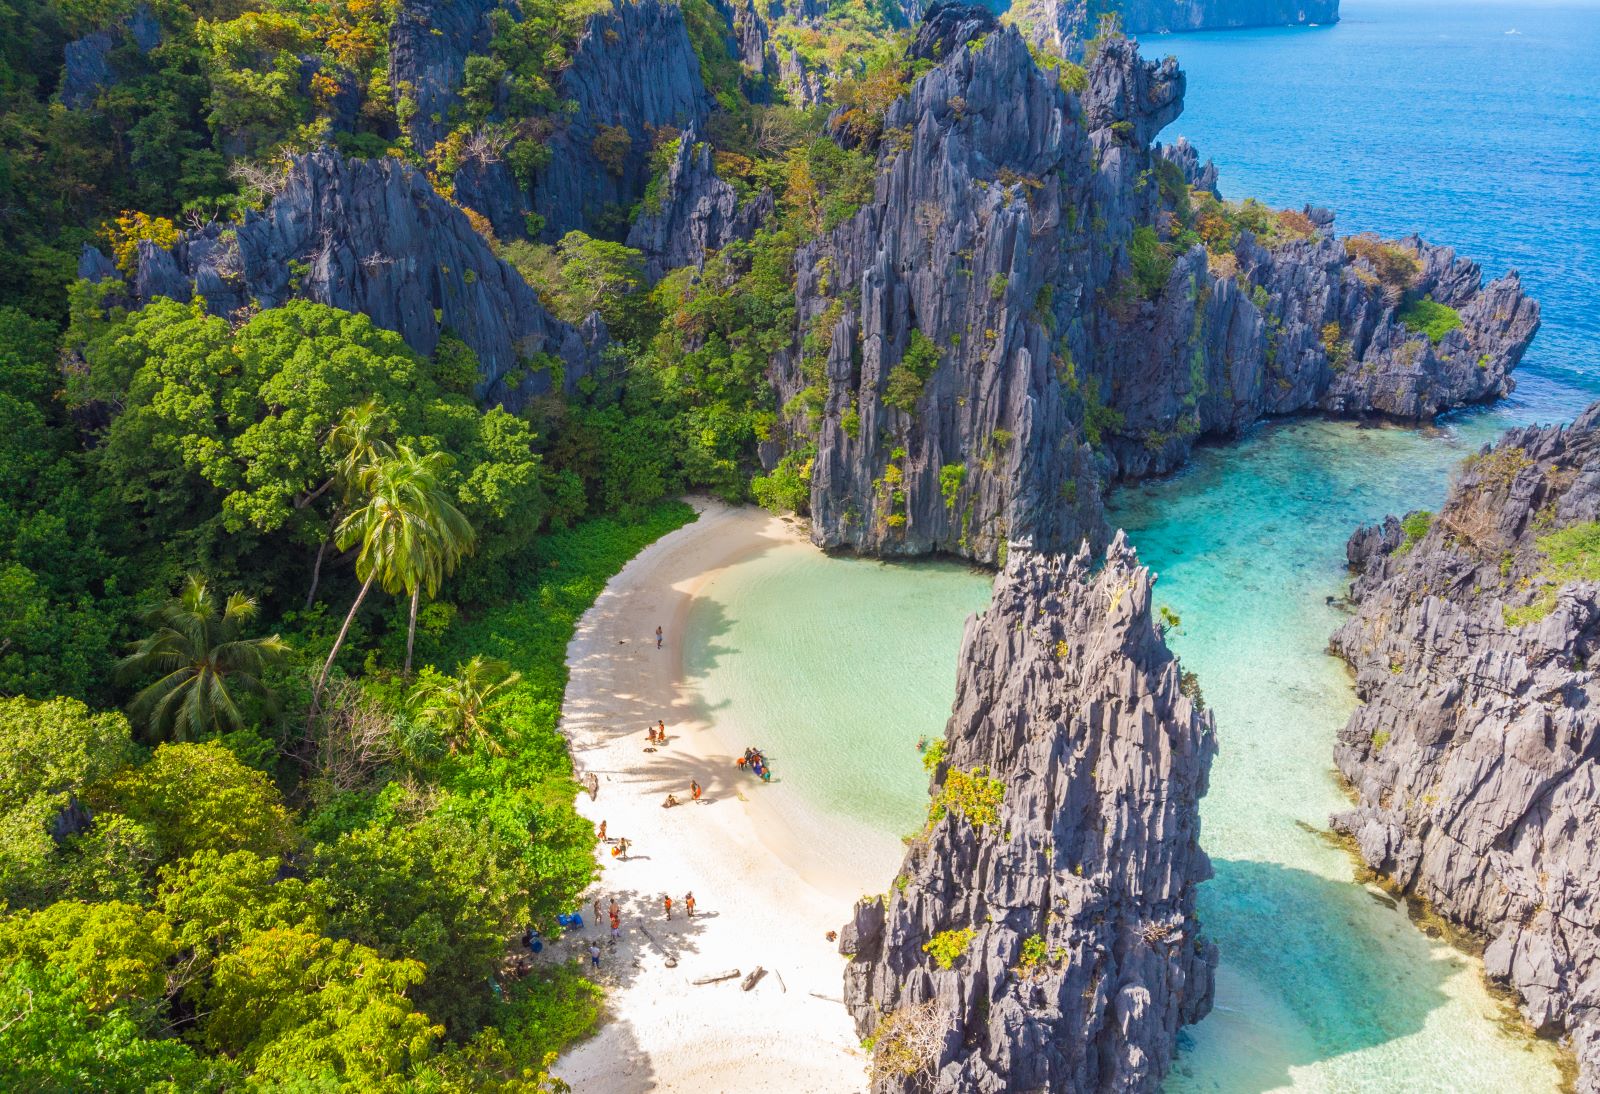 <p class="wp-caption-text">Image Credit: Shutterstock / Simon Dannhauer</p>  <p><span>Palawan, often dubbed “The Last Frontier,” is renowned for its untouched natural beauty, stretching from the stunning limestone cliffs of El Nido to the crystal-clear waters of Coron. This island serves as a sanctuary for diverse marine and terrestrial wildlife and hosts some of the most picturesque landscapes in the Philippines. Its crown jewel, the Underground River in Puerto Princesa, is a UNESCO World Heritage Site and one of the New 7 Wonders of Nature, offering an extraordinary experience as you navigate through its majestic cave systems.</span></p>